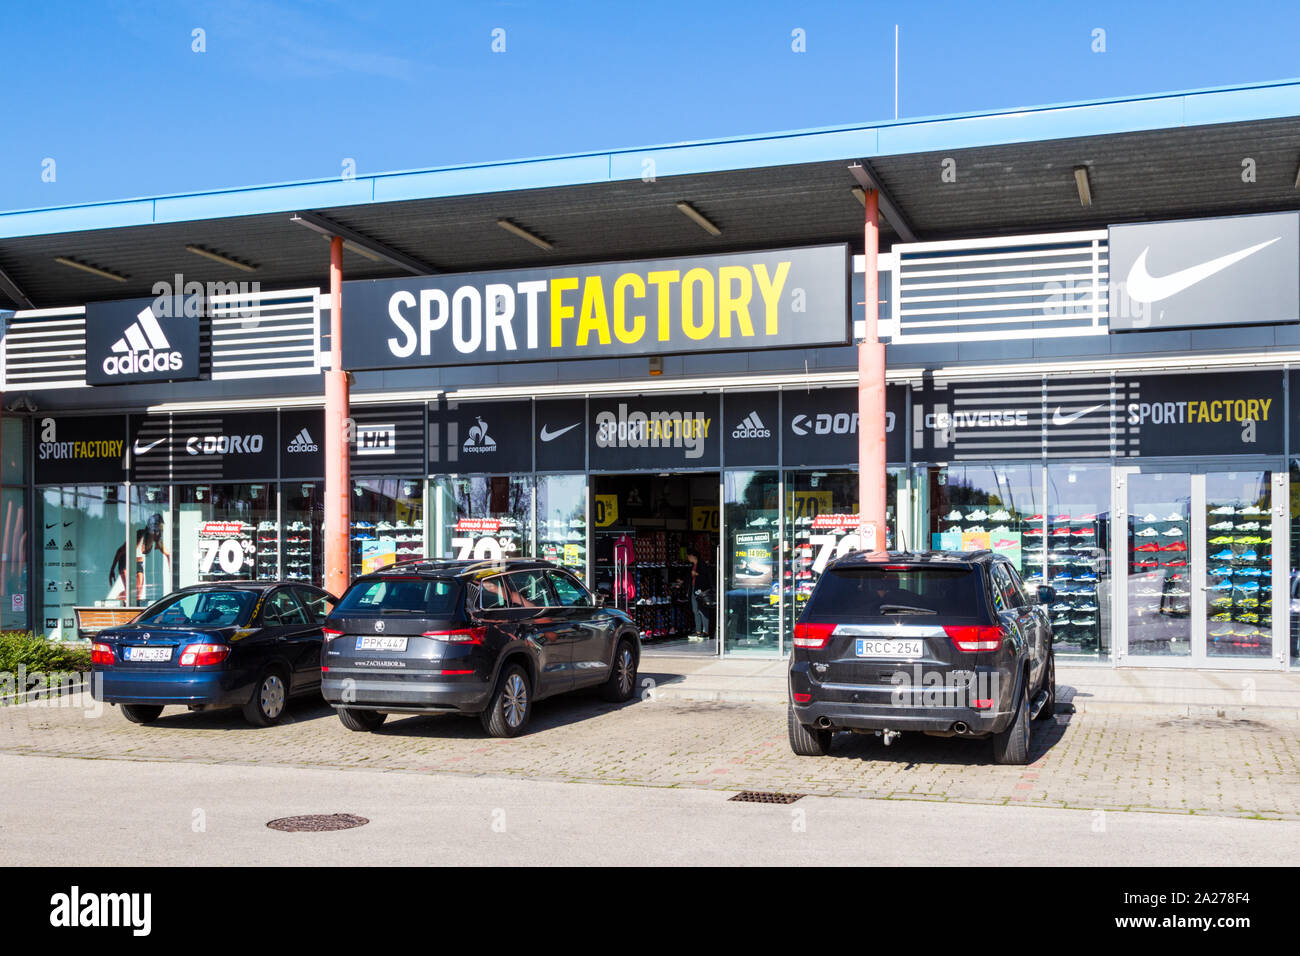 Sportfactory sport sports and clothes shop store front facade with large  Nike and Adidas brand logo in Family Center, Sopron, Hungary Stock Photo -  Alamy